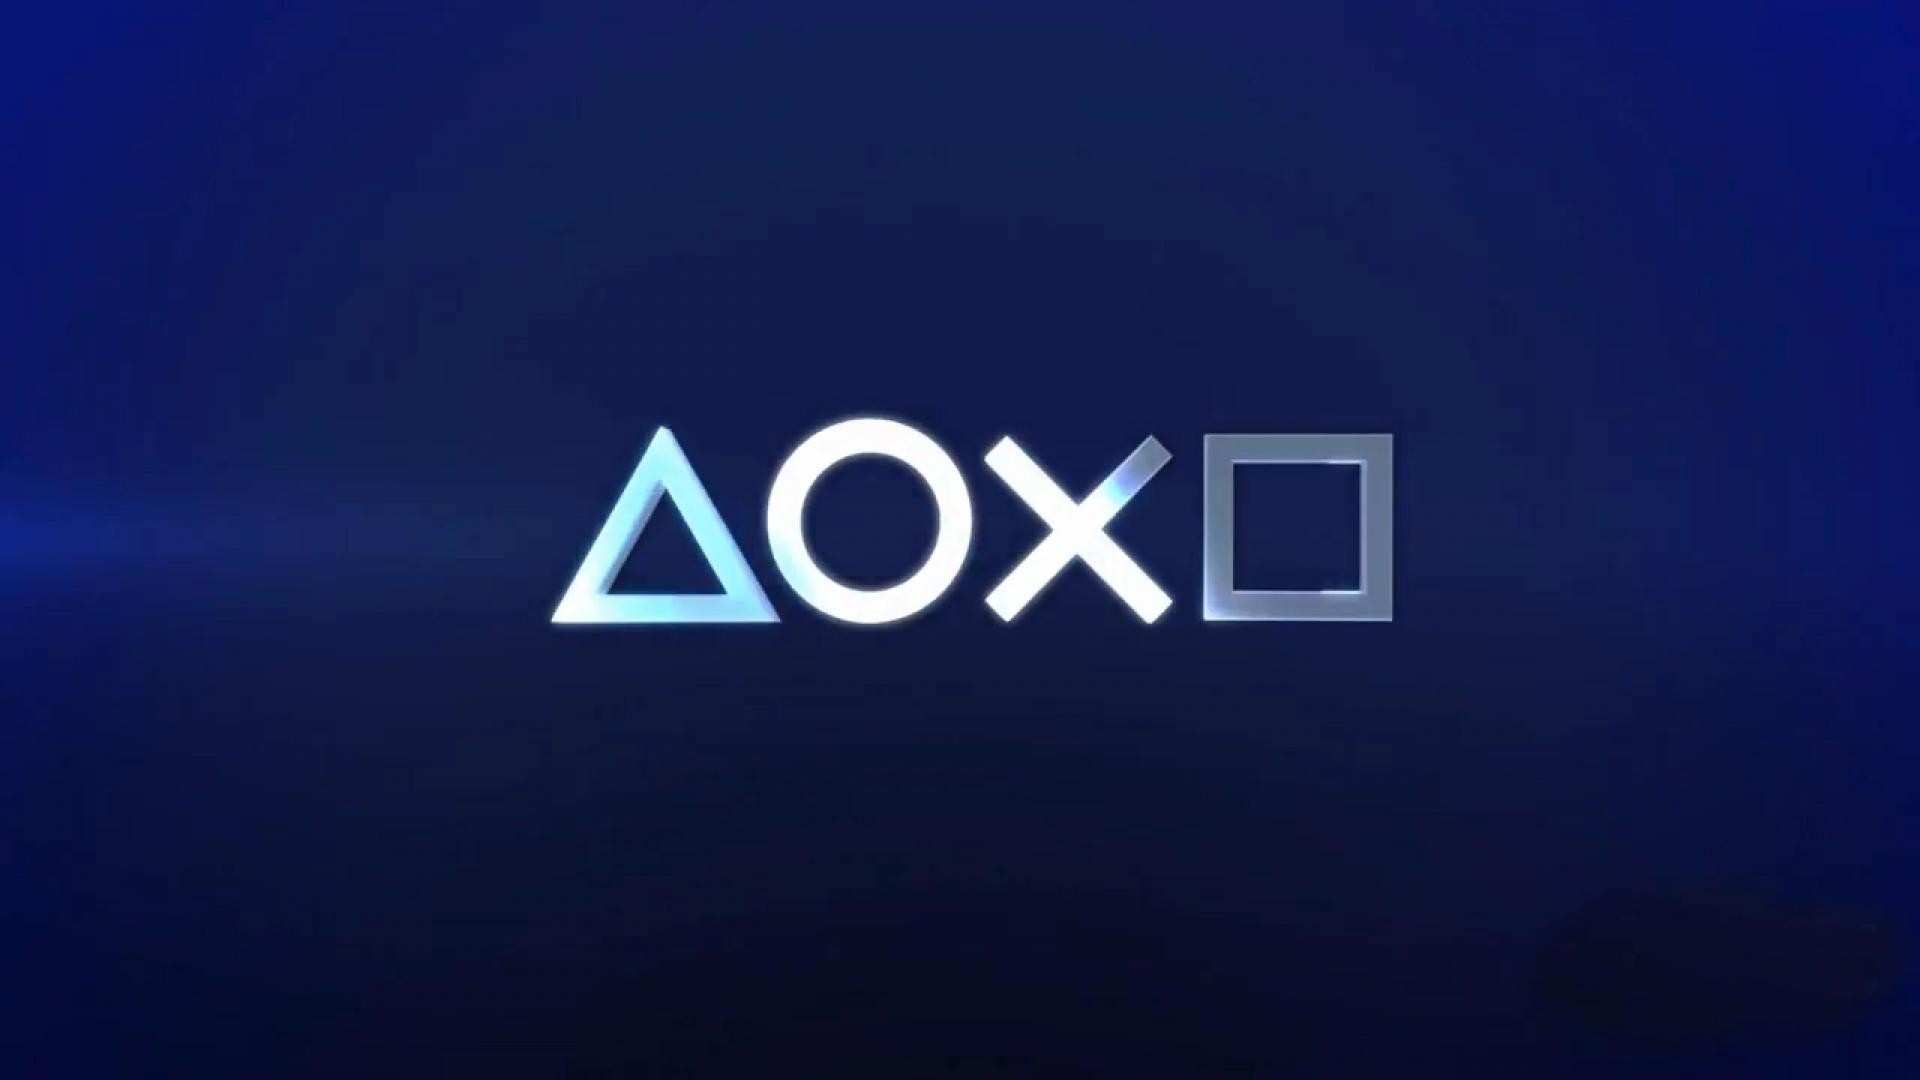 1920x1080 Ps4 Wallpaper 1080p Ps4 Wallpapers in 1080p Xbox